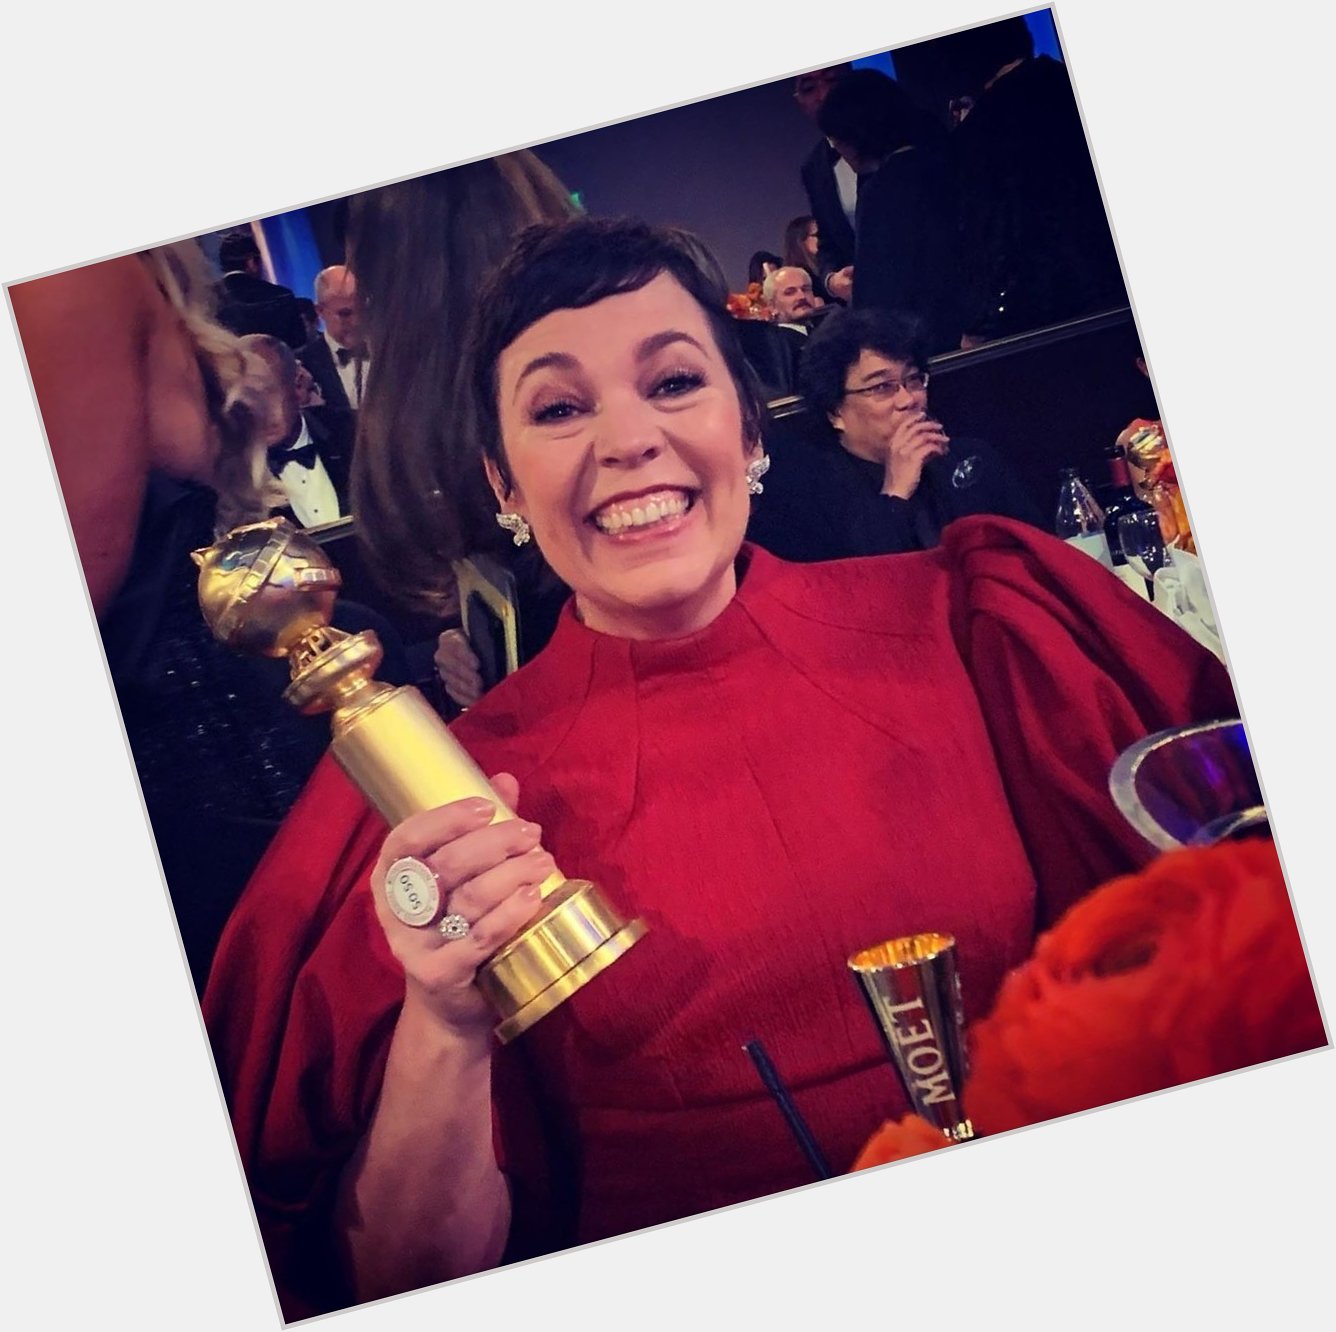 Sooooo late but happy birthday to the queen that is olivia colman 